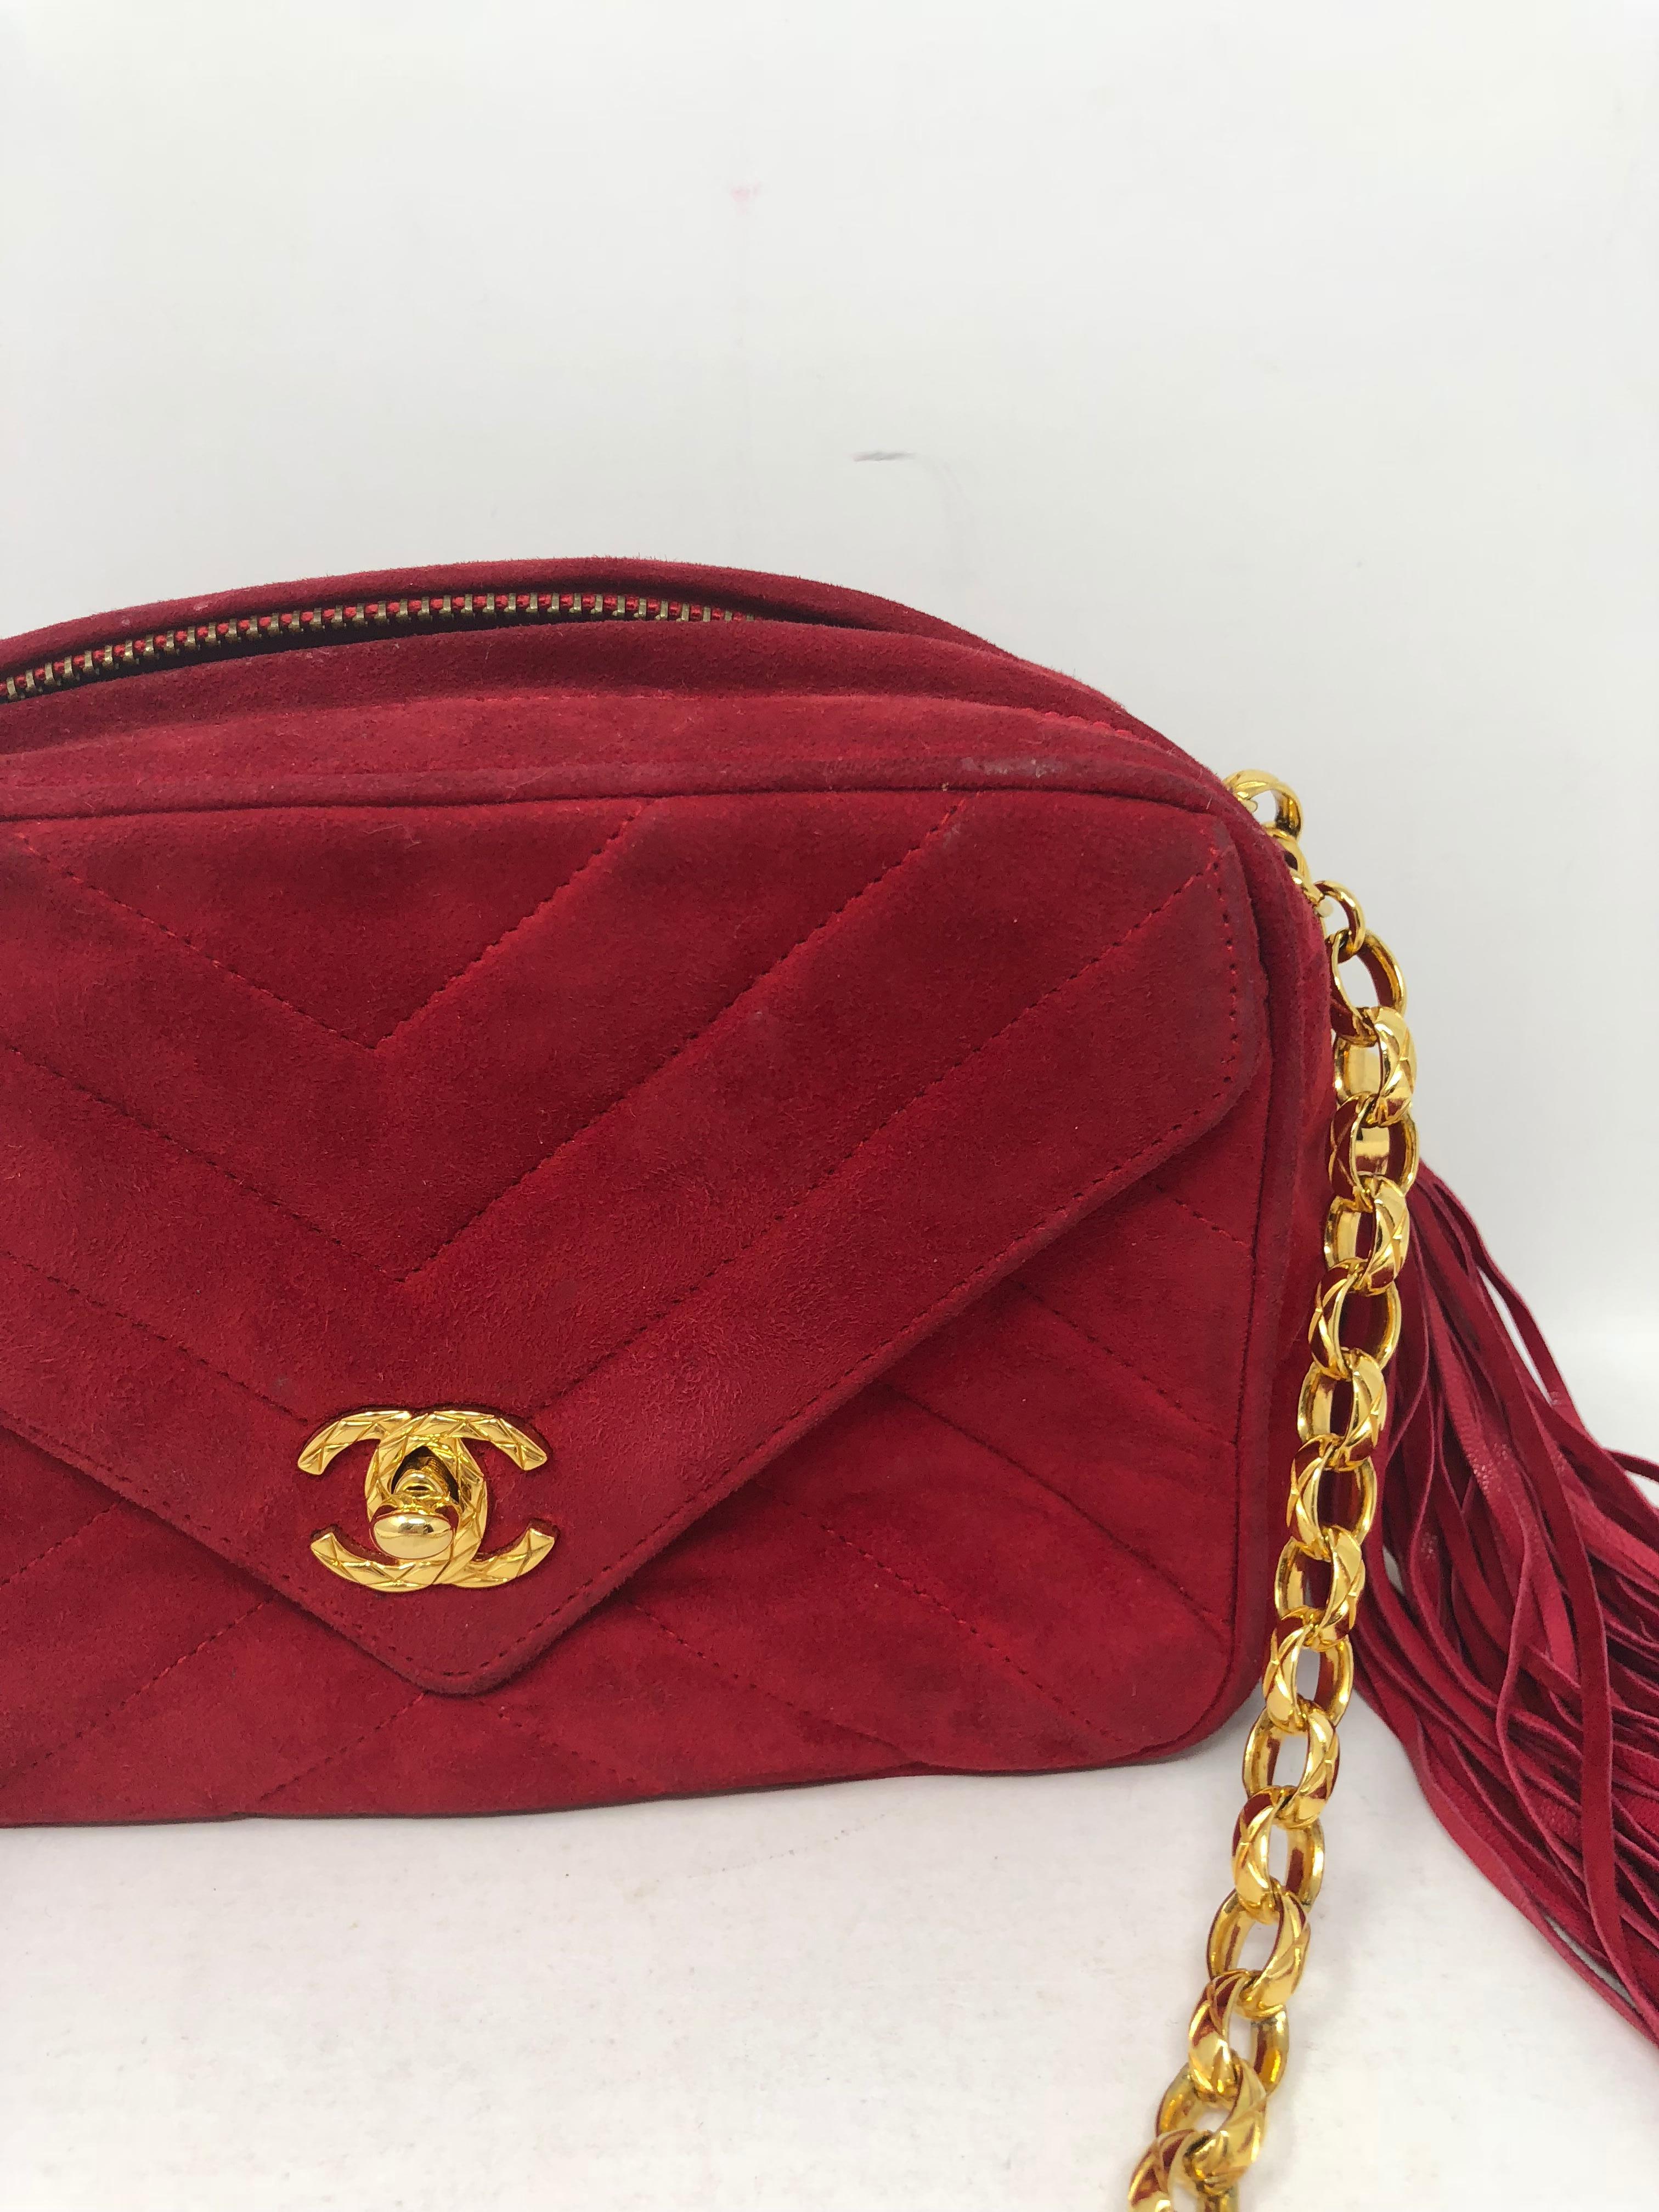 Chanel Red Suede Bag with Fringe Tassel. Vintage cherry red color with gold hardware. Chain is unique and a rare style. Suede has some wear with darker spots on back. Fair condition with lots of life left. The suede can be cleaned. The gold has not